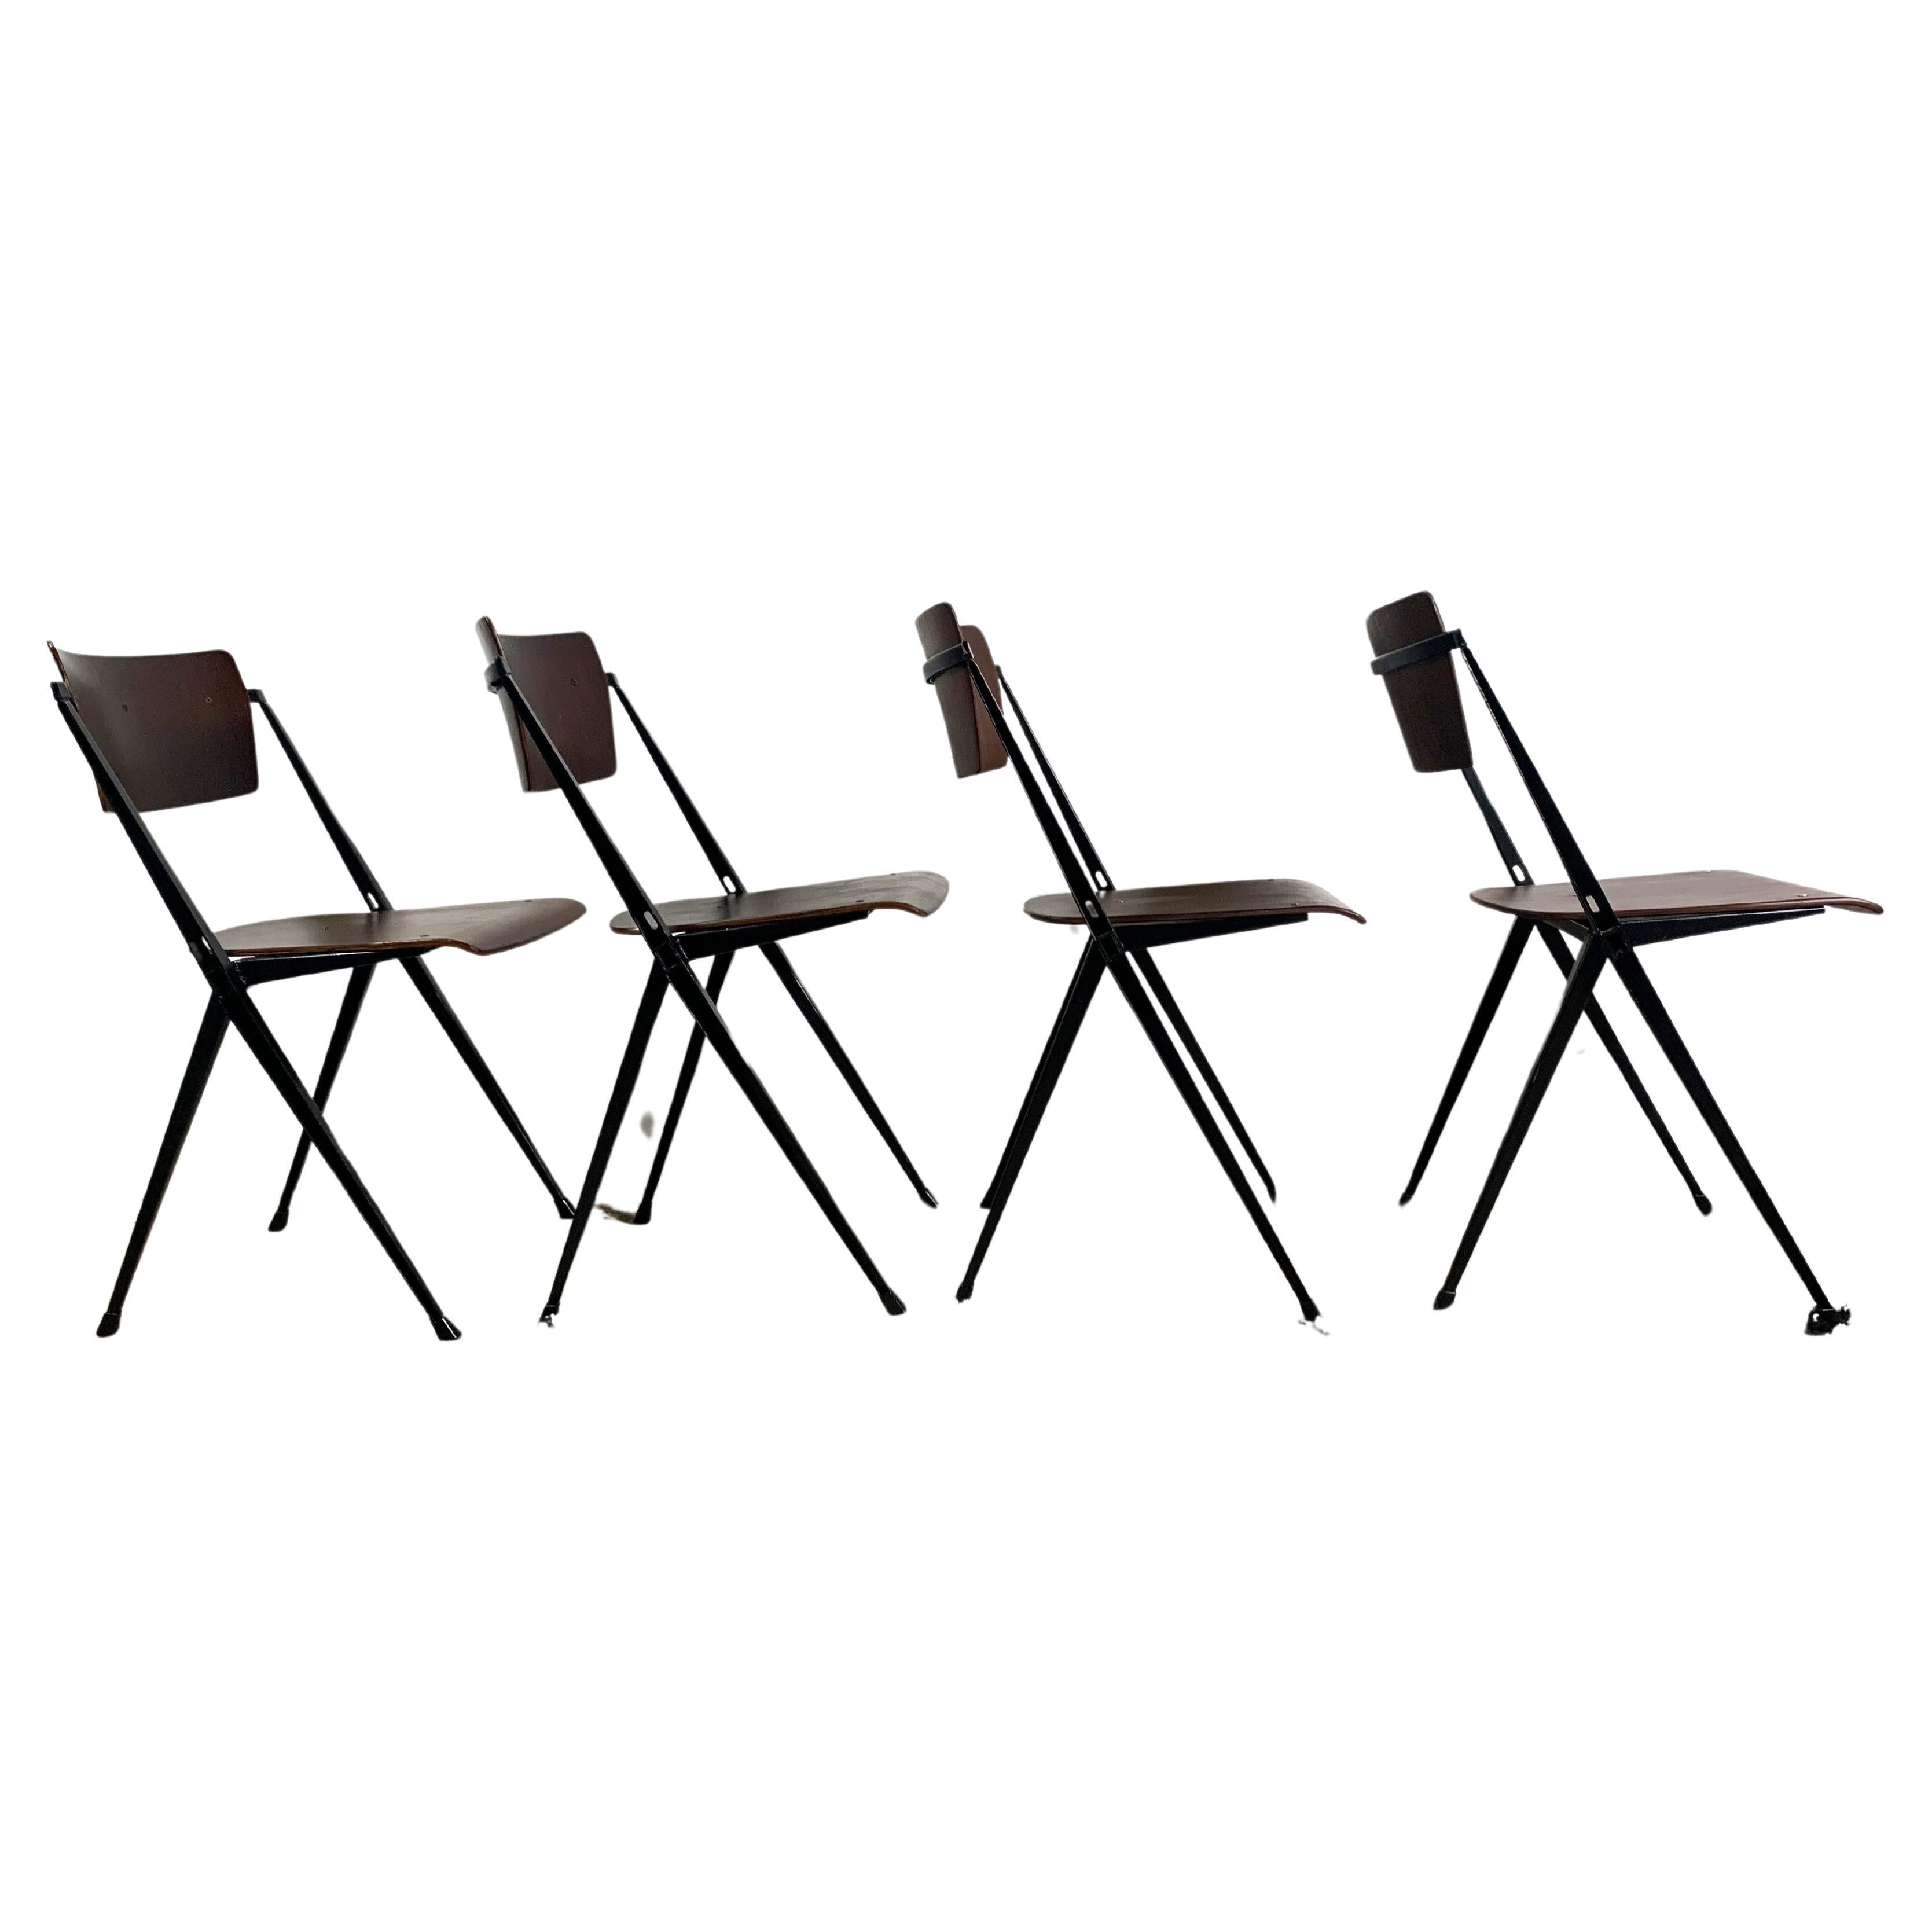 Pyramide Chairs By Wim Rietveld Set Of 4, Industrial Mid Century For Sale